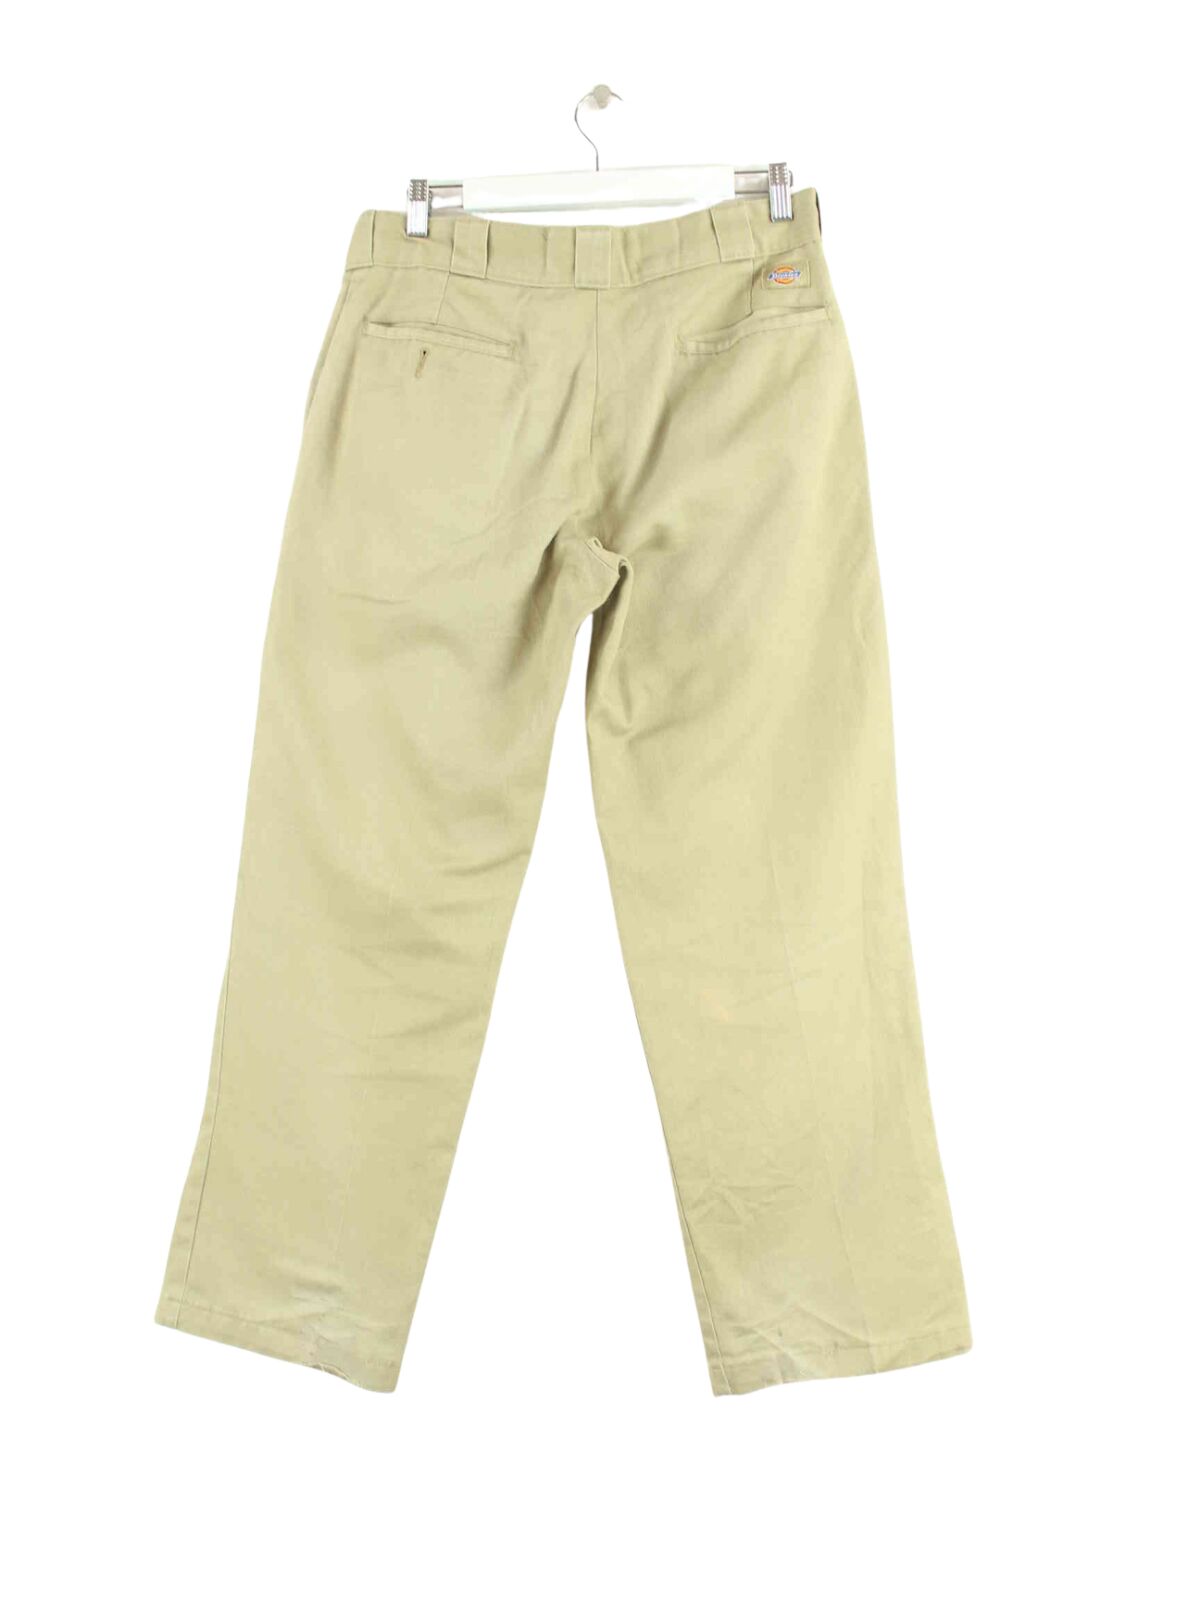 Dickies Chino Hose Beige W30 L30 (back image)